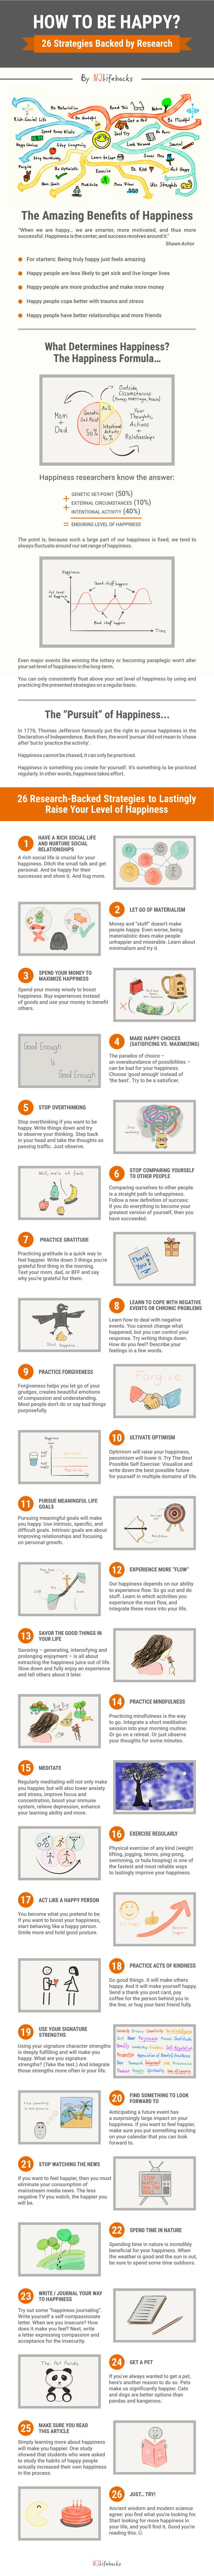 How to Be Happy: 26 Strategies Backed by Research